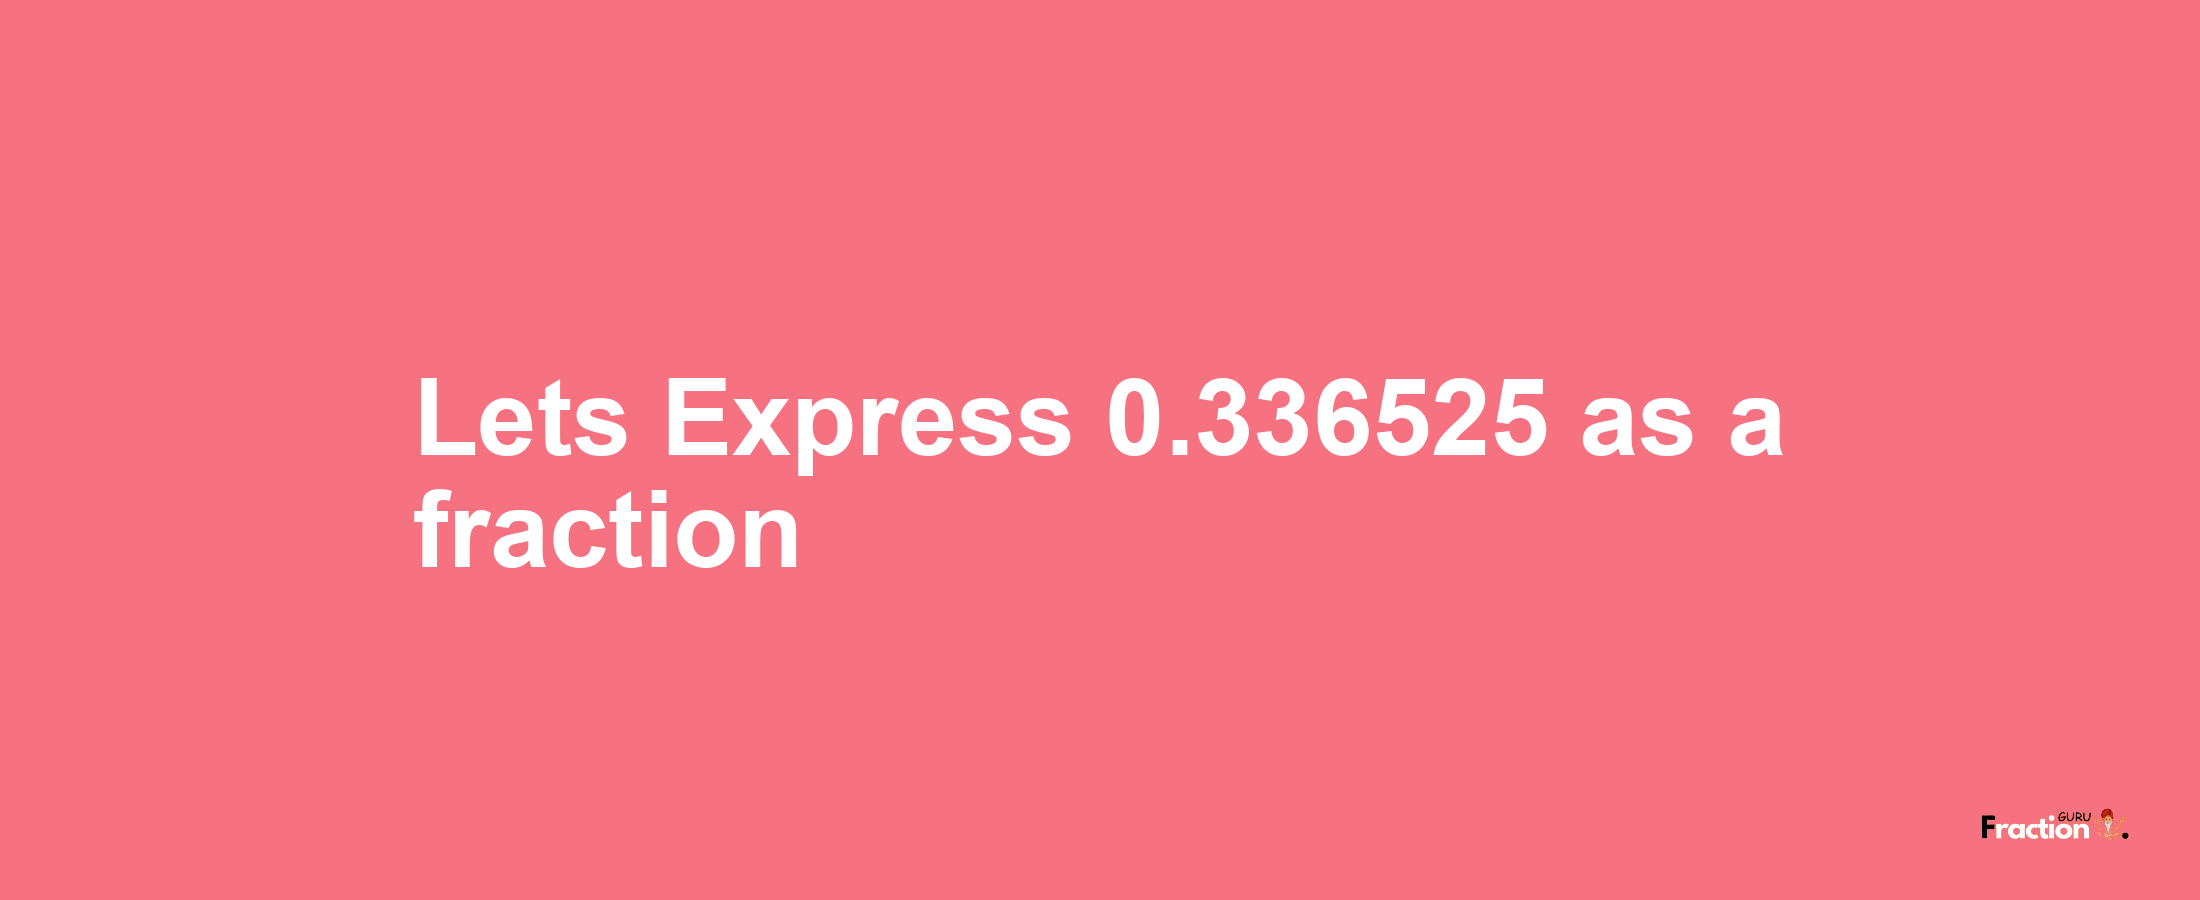 Lets Express 0.336525 as afraction